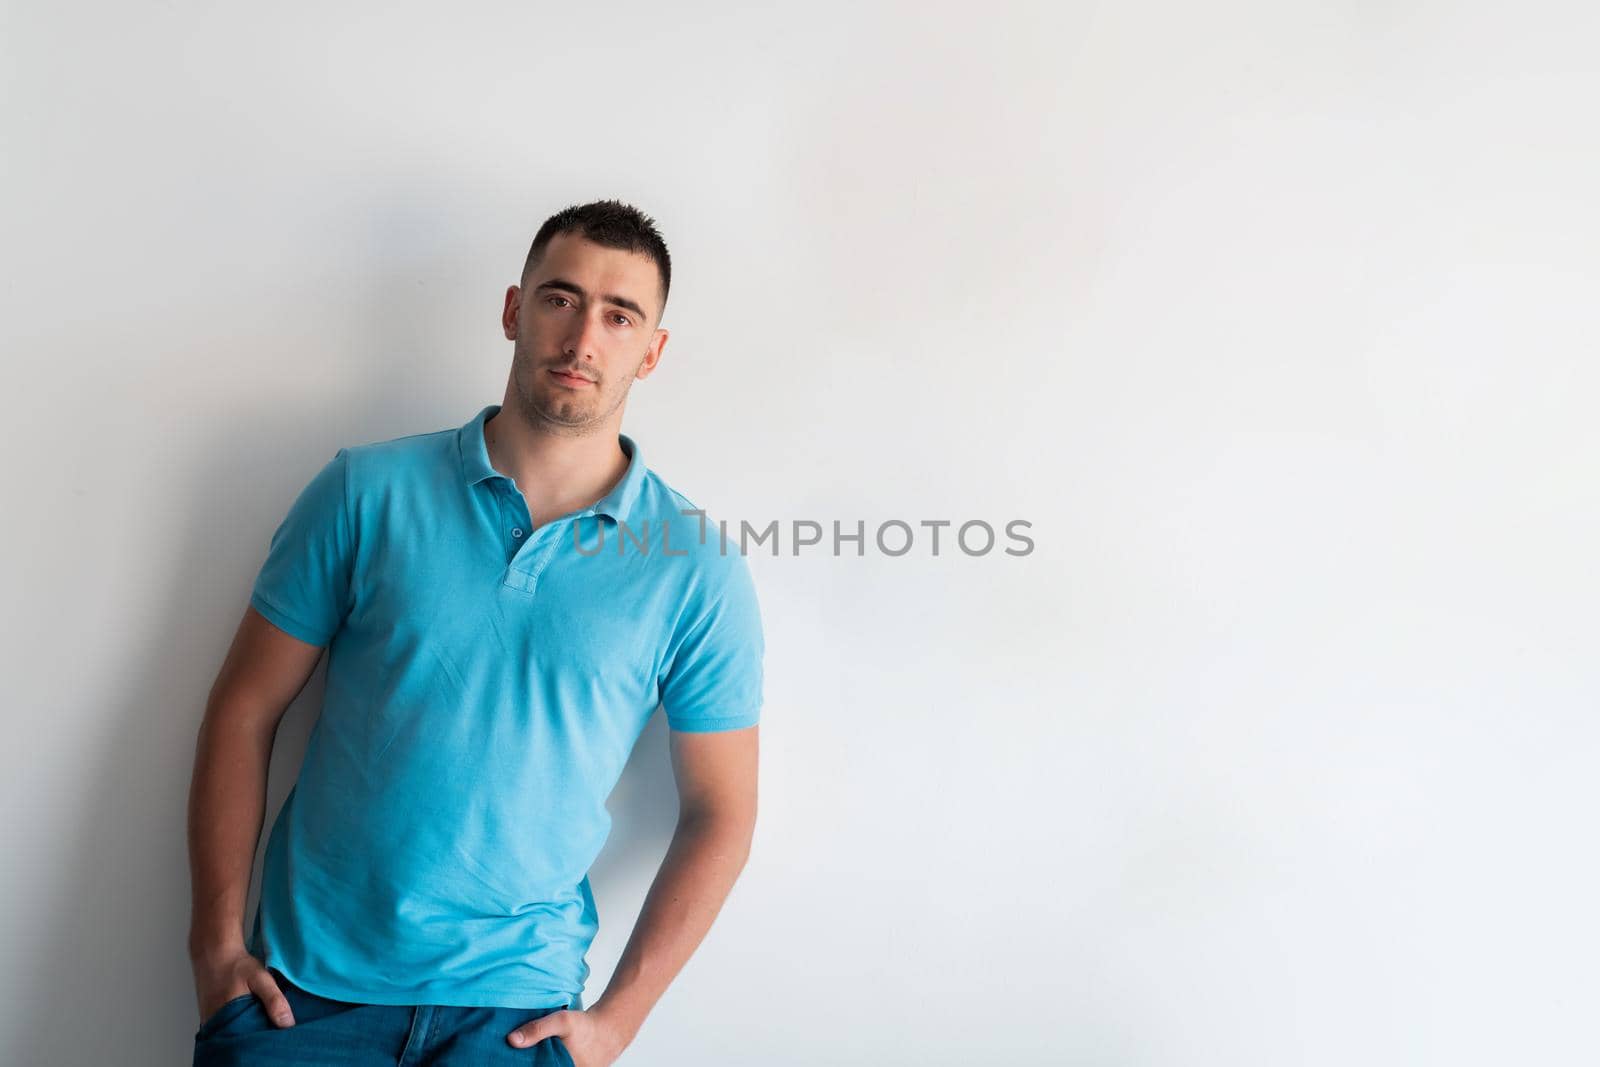 Formal business male portrait. A confident successful casual businessman or manager stands in front of a white background. High-quality photo